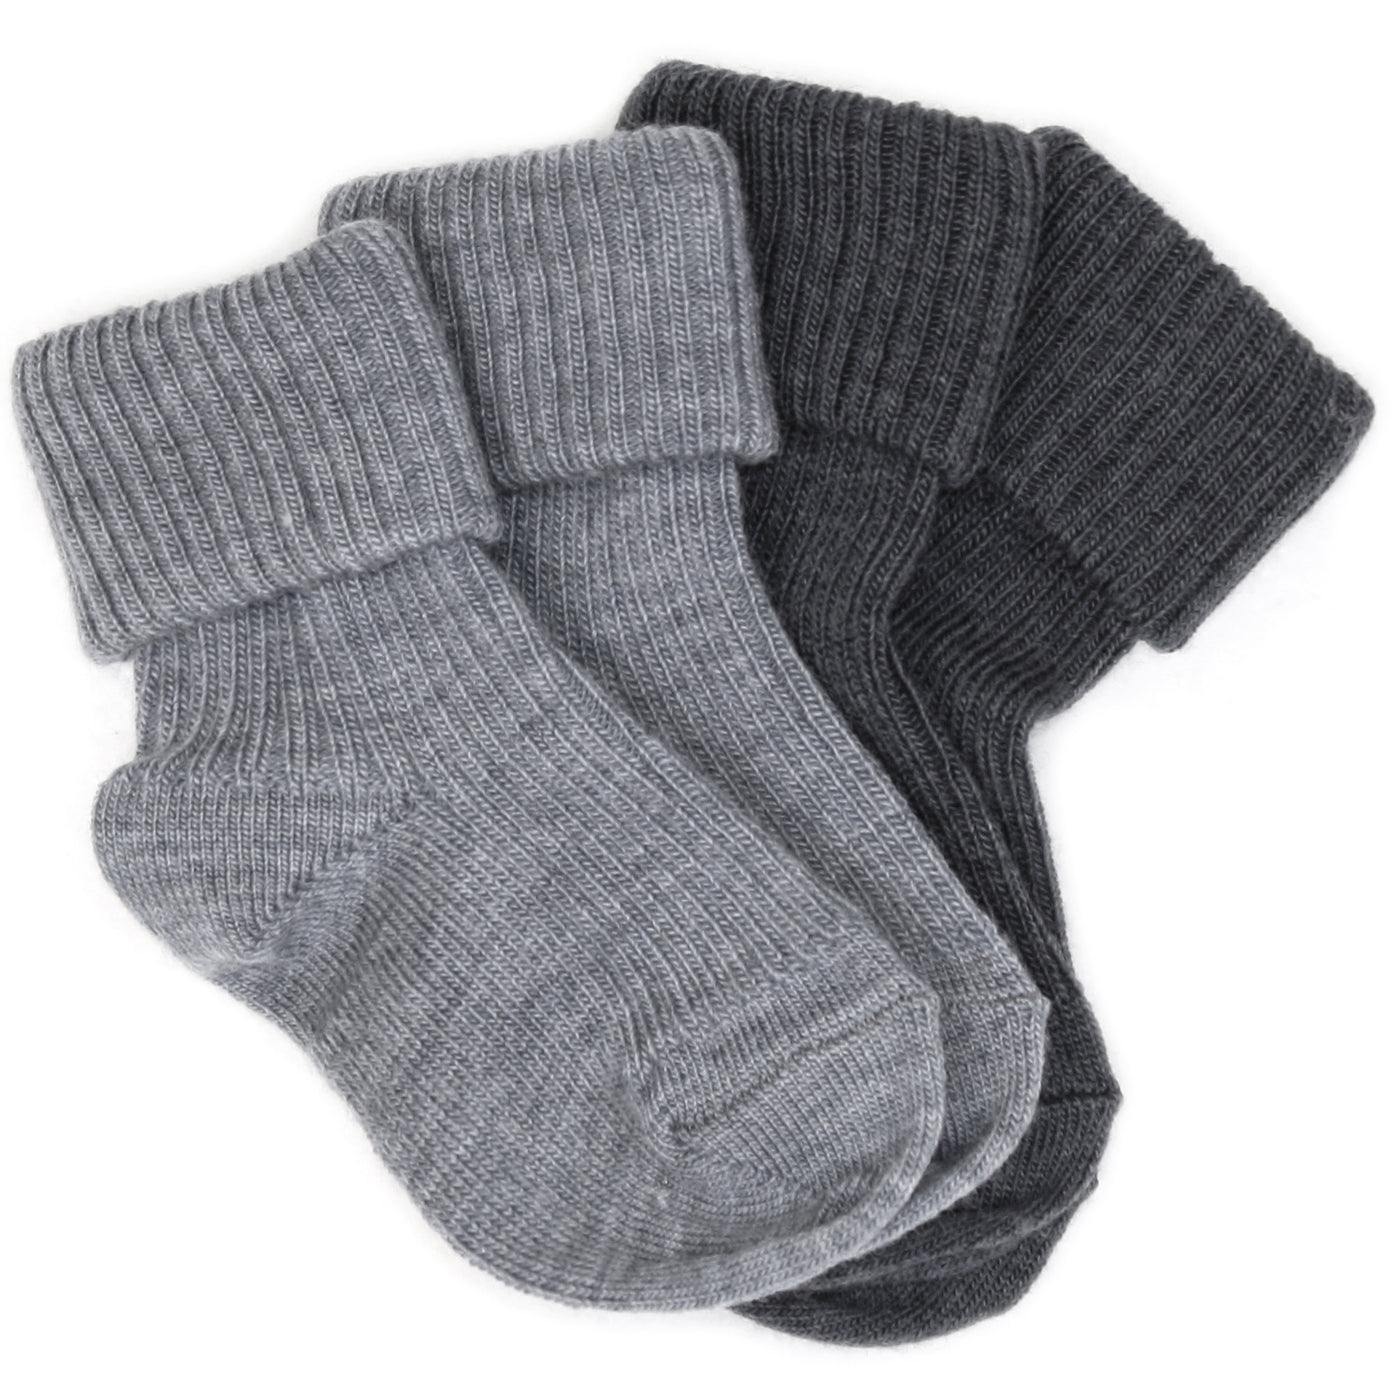 Imperfect Wool Socks, Baby and Toddler, Light & Dark Slate - TWO PAIR PACK (discontinued)